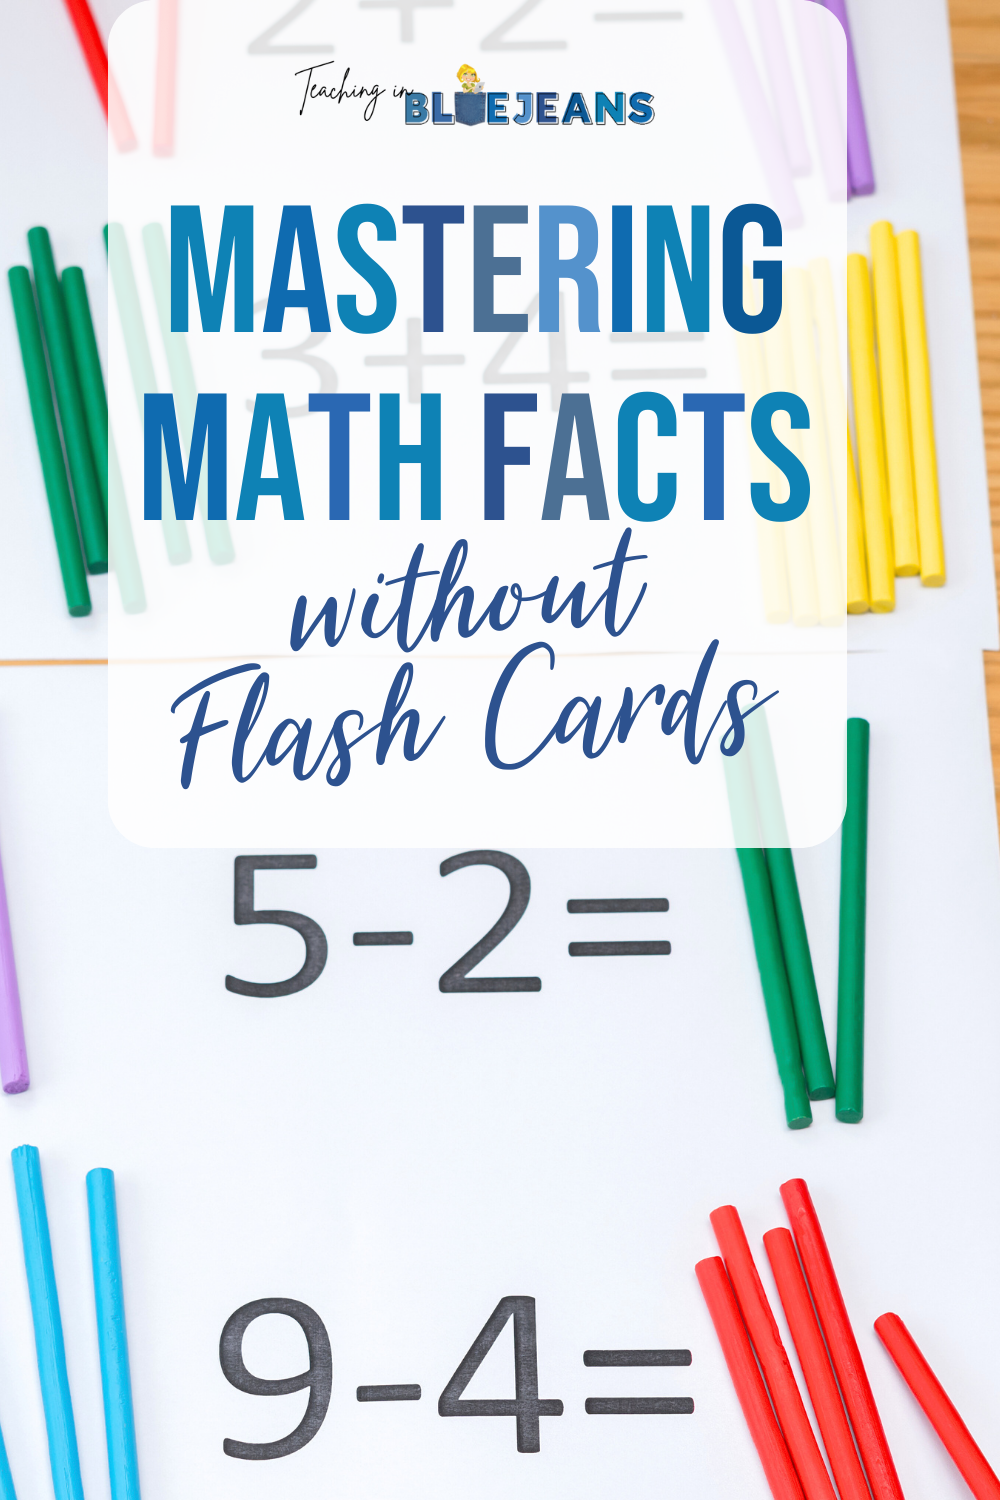 Help your students learn their basic math facts without the drill and kill of flash cards. These hands-on and interactive activities will help your kids learn their math facts while having fun. #mathfacts #elementarymath